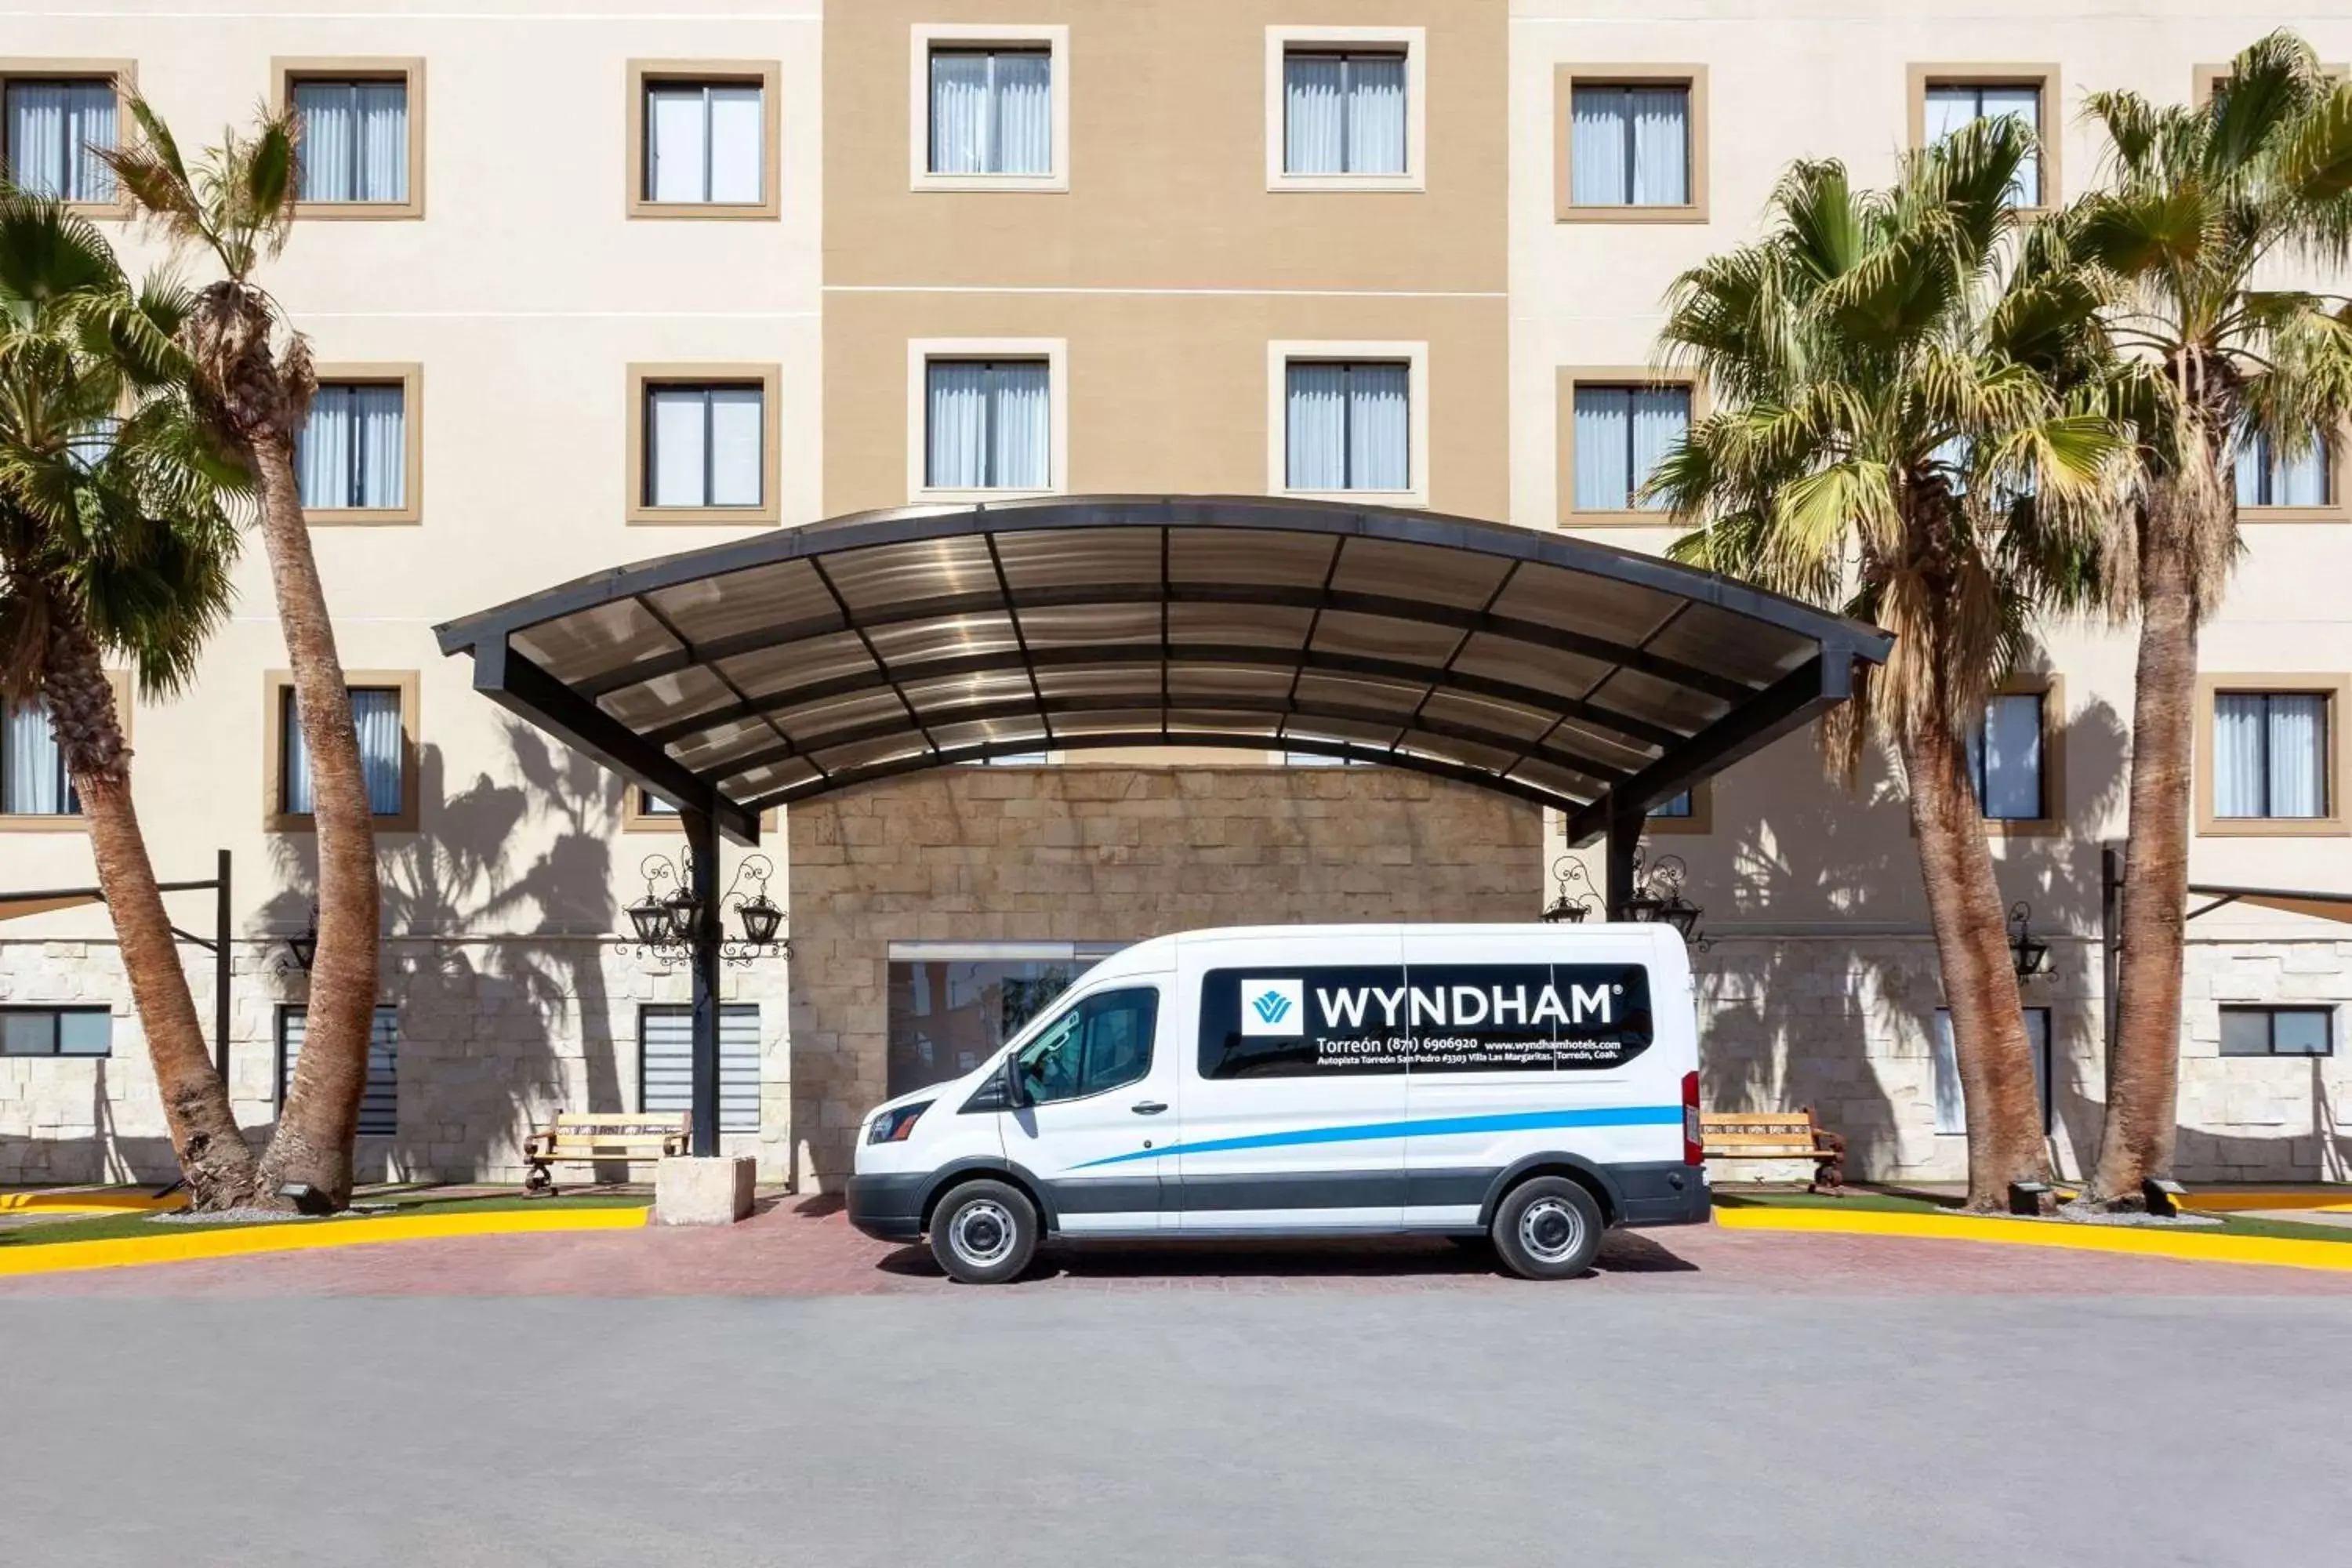 On site in Wyndham Torreon